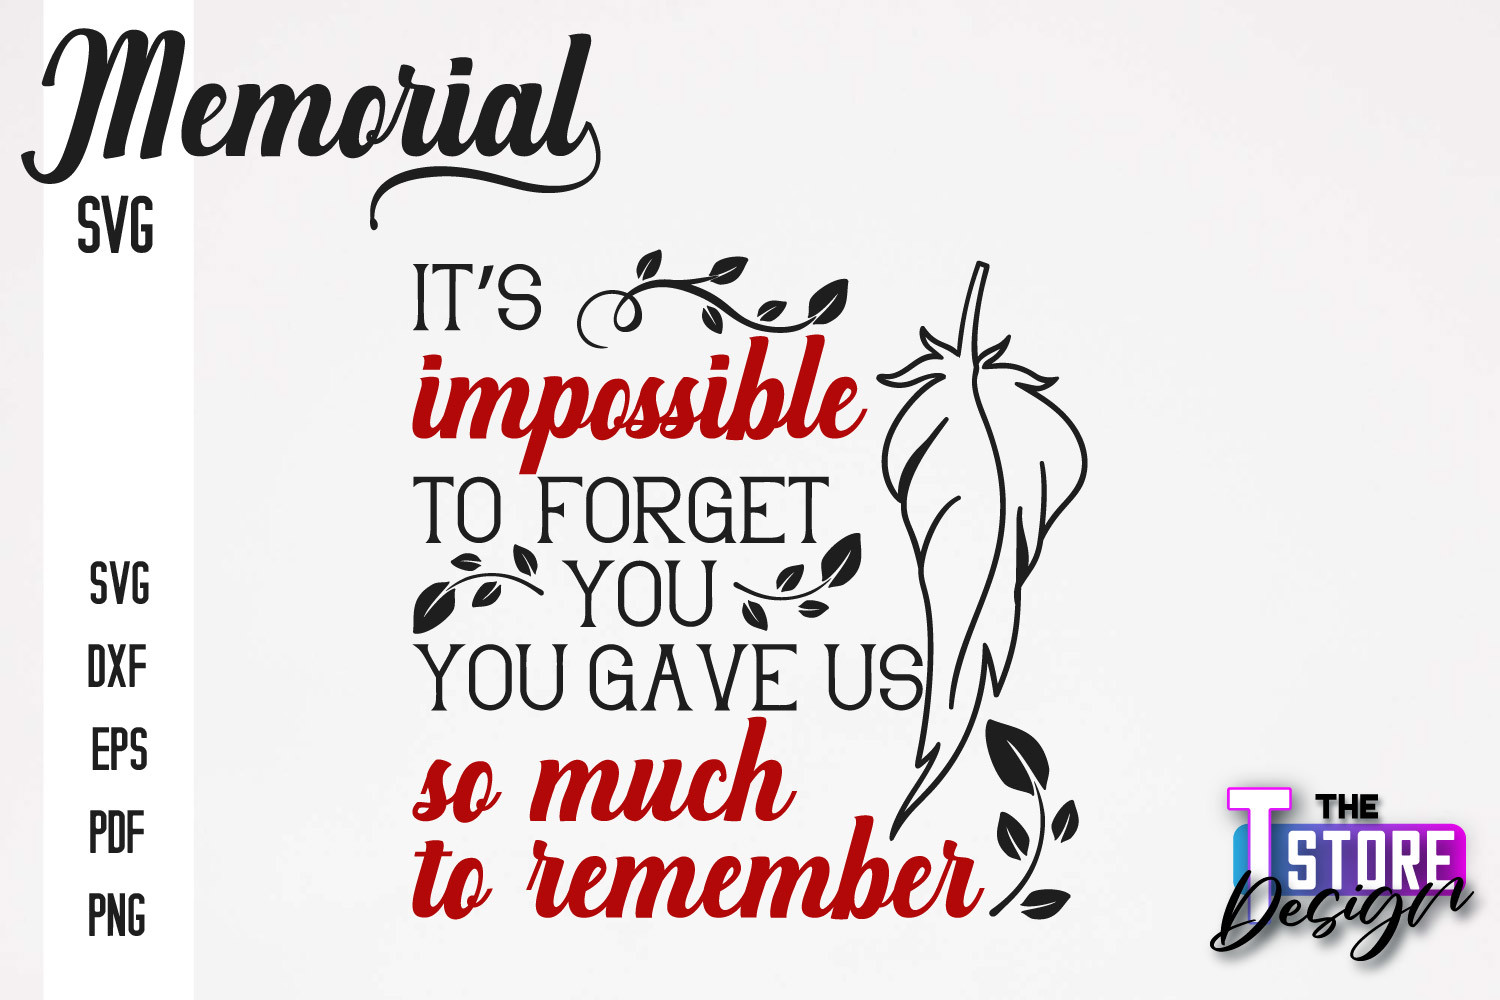 Memorial SVG | Memorial SVG Design | SVG Graphic by The T Store Design ...